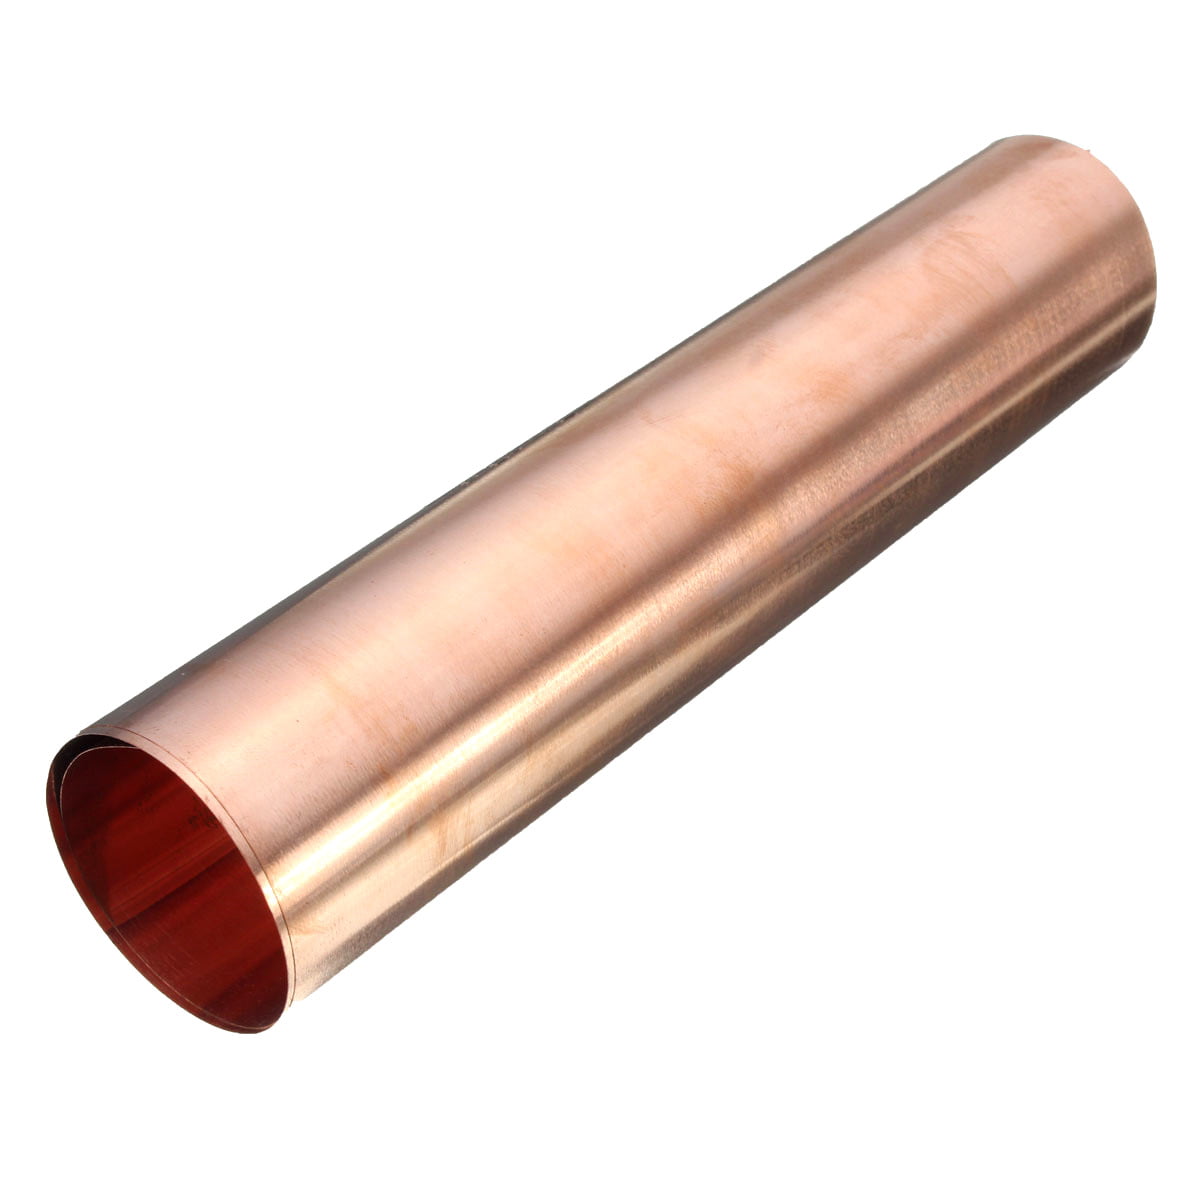 YIWANGO Copper Sheet Pure Copper Metal Sheet Foil Jewelry Making Suitable to Weld and Braz,100mm x 100mm x 3mm Pure Copper Sheet Size : 100mm x 100mm x 2mm